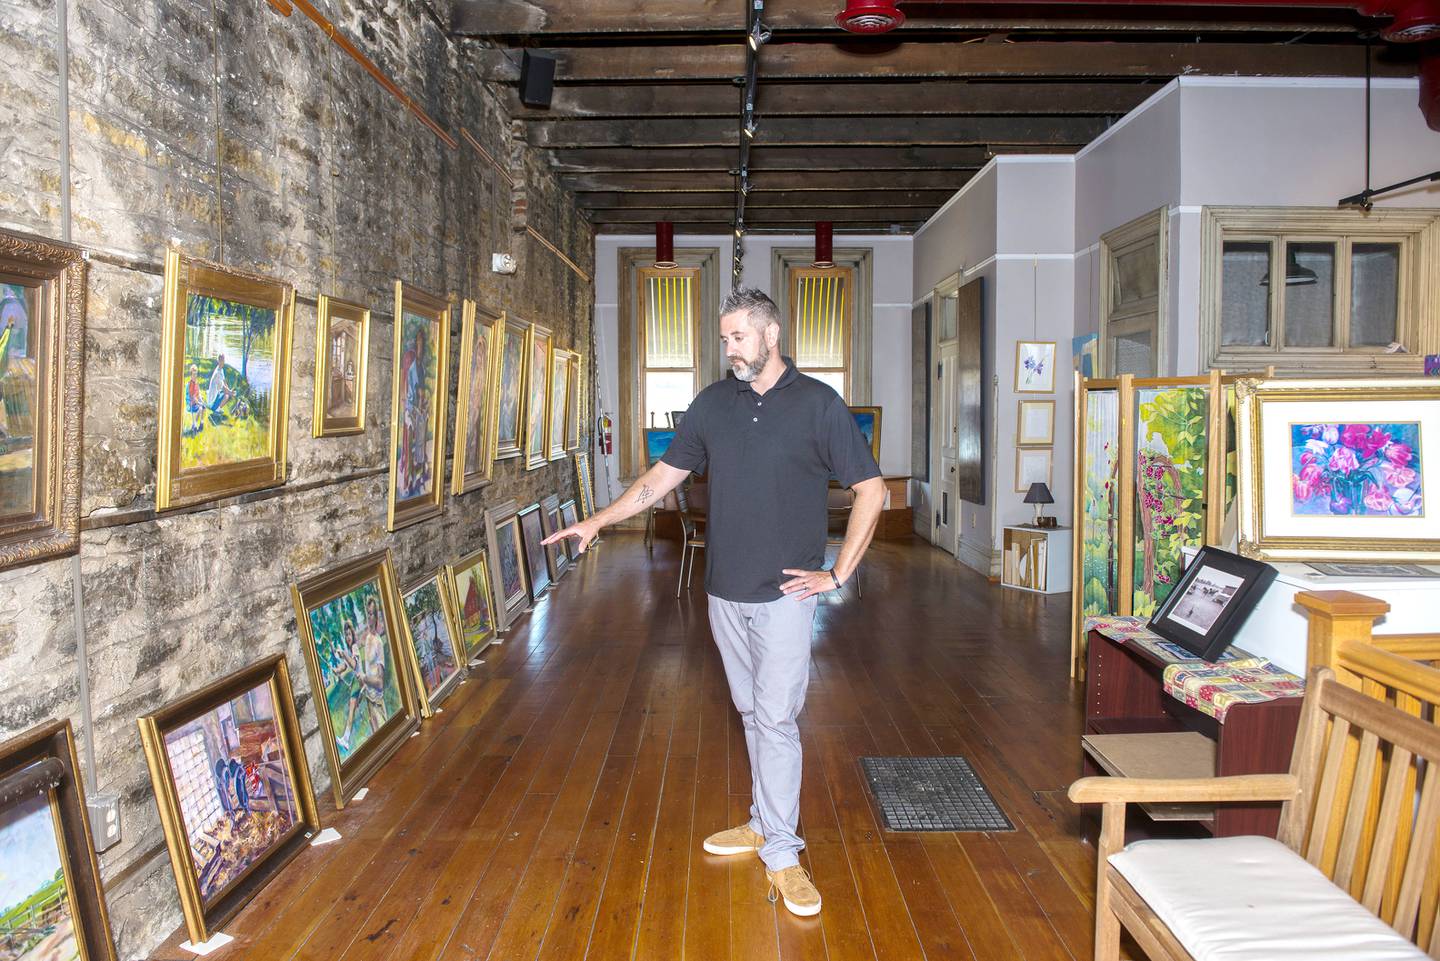 Phil Atilano, new executive director of The Next Picture Show, is turning the unused upstairs in the historic Dixon building into more gallery space.